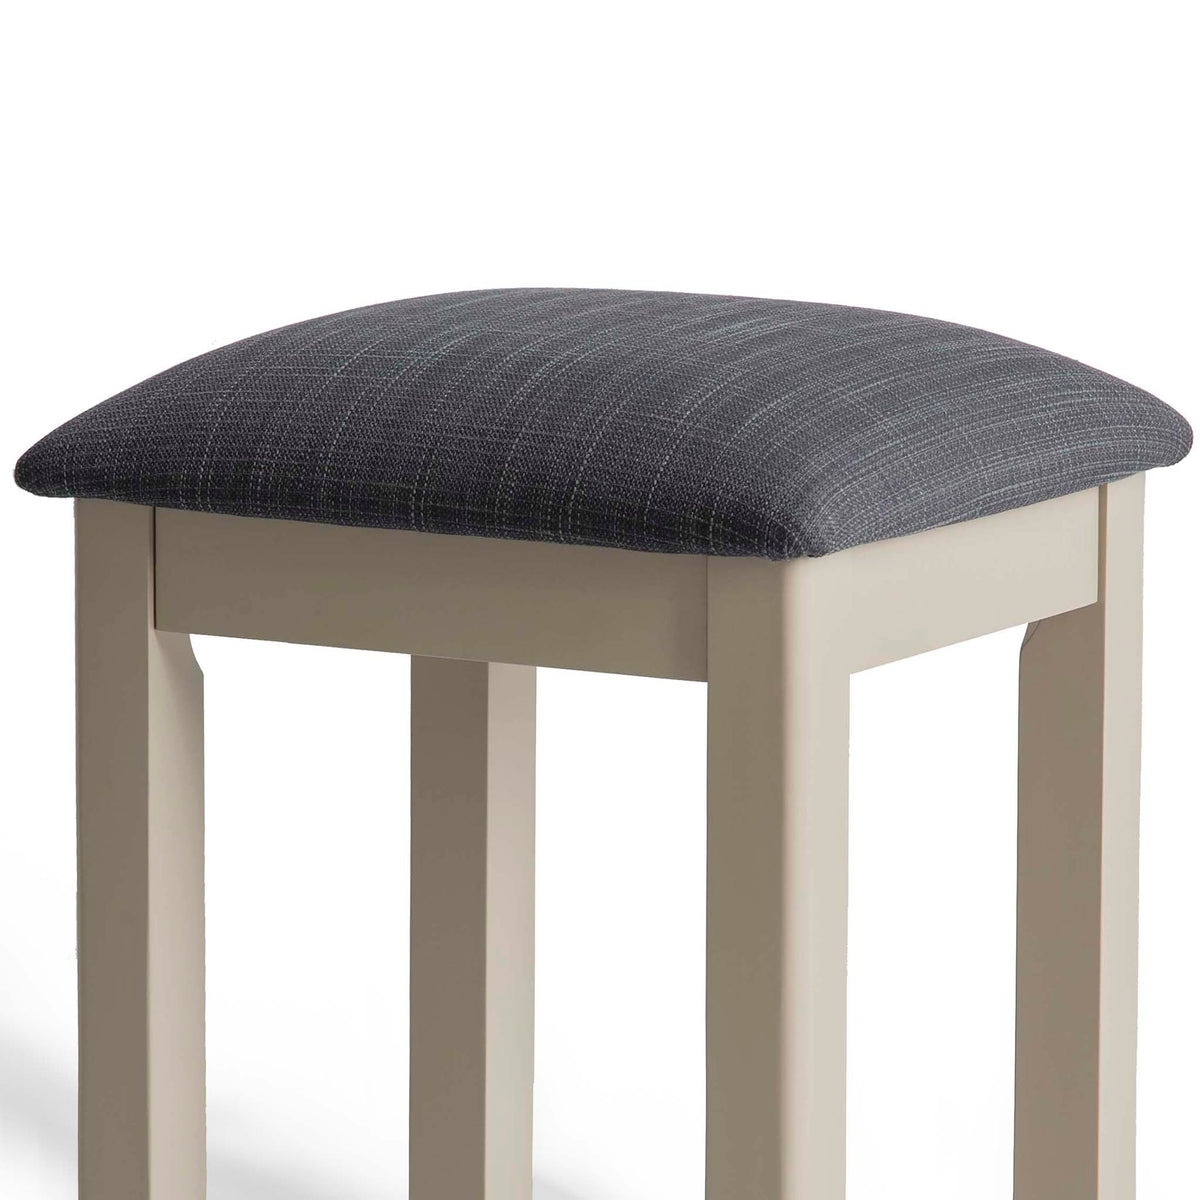 The Padstow Stone Grey Dressing Table Stool  - Close up of Seat